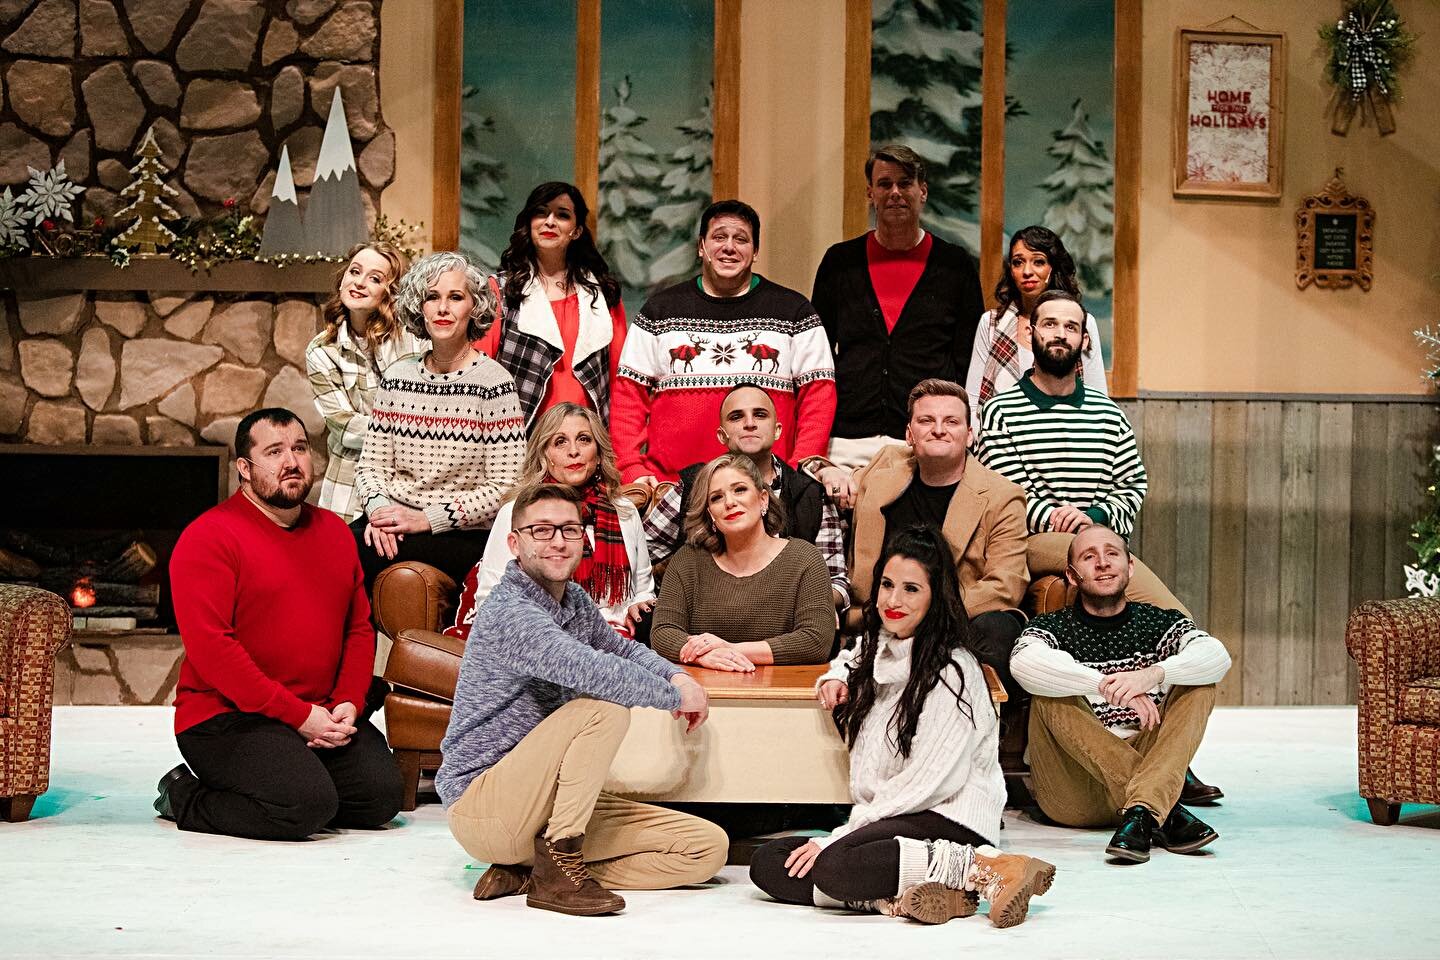 “Holiday at Lebowsky" runs 7:30 p.m. Friday and Saturday and 2 p.m. Saturday and Sunday at the Lebowsky Center for Performing Arts in Owosso.